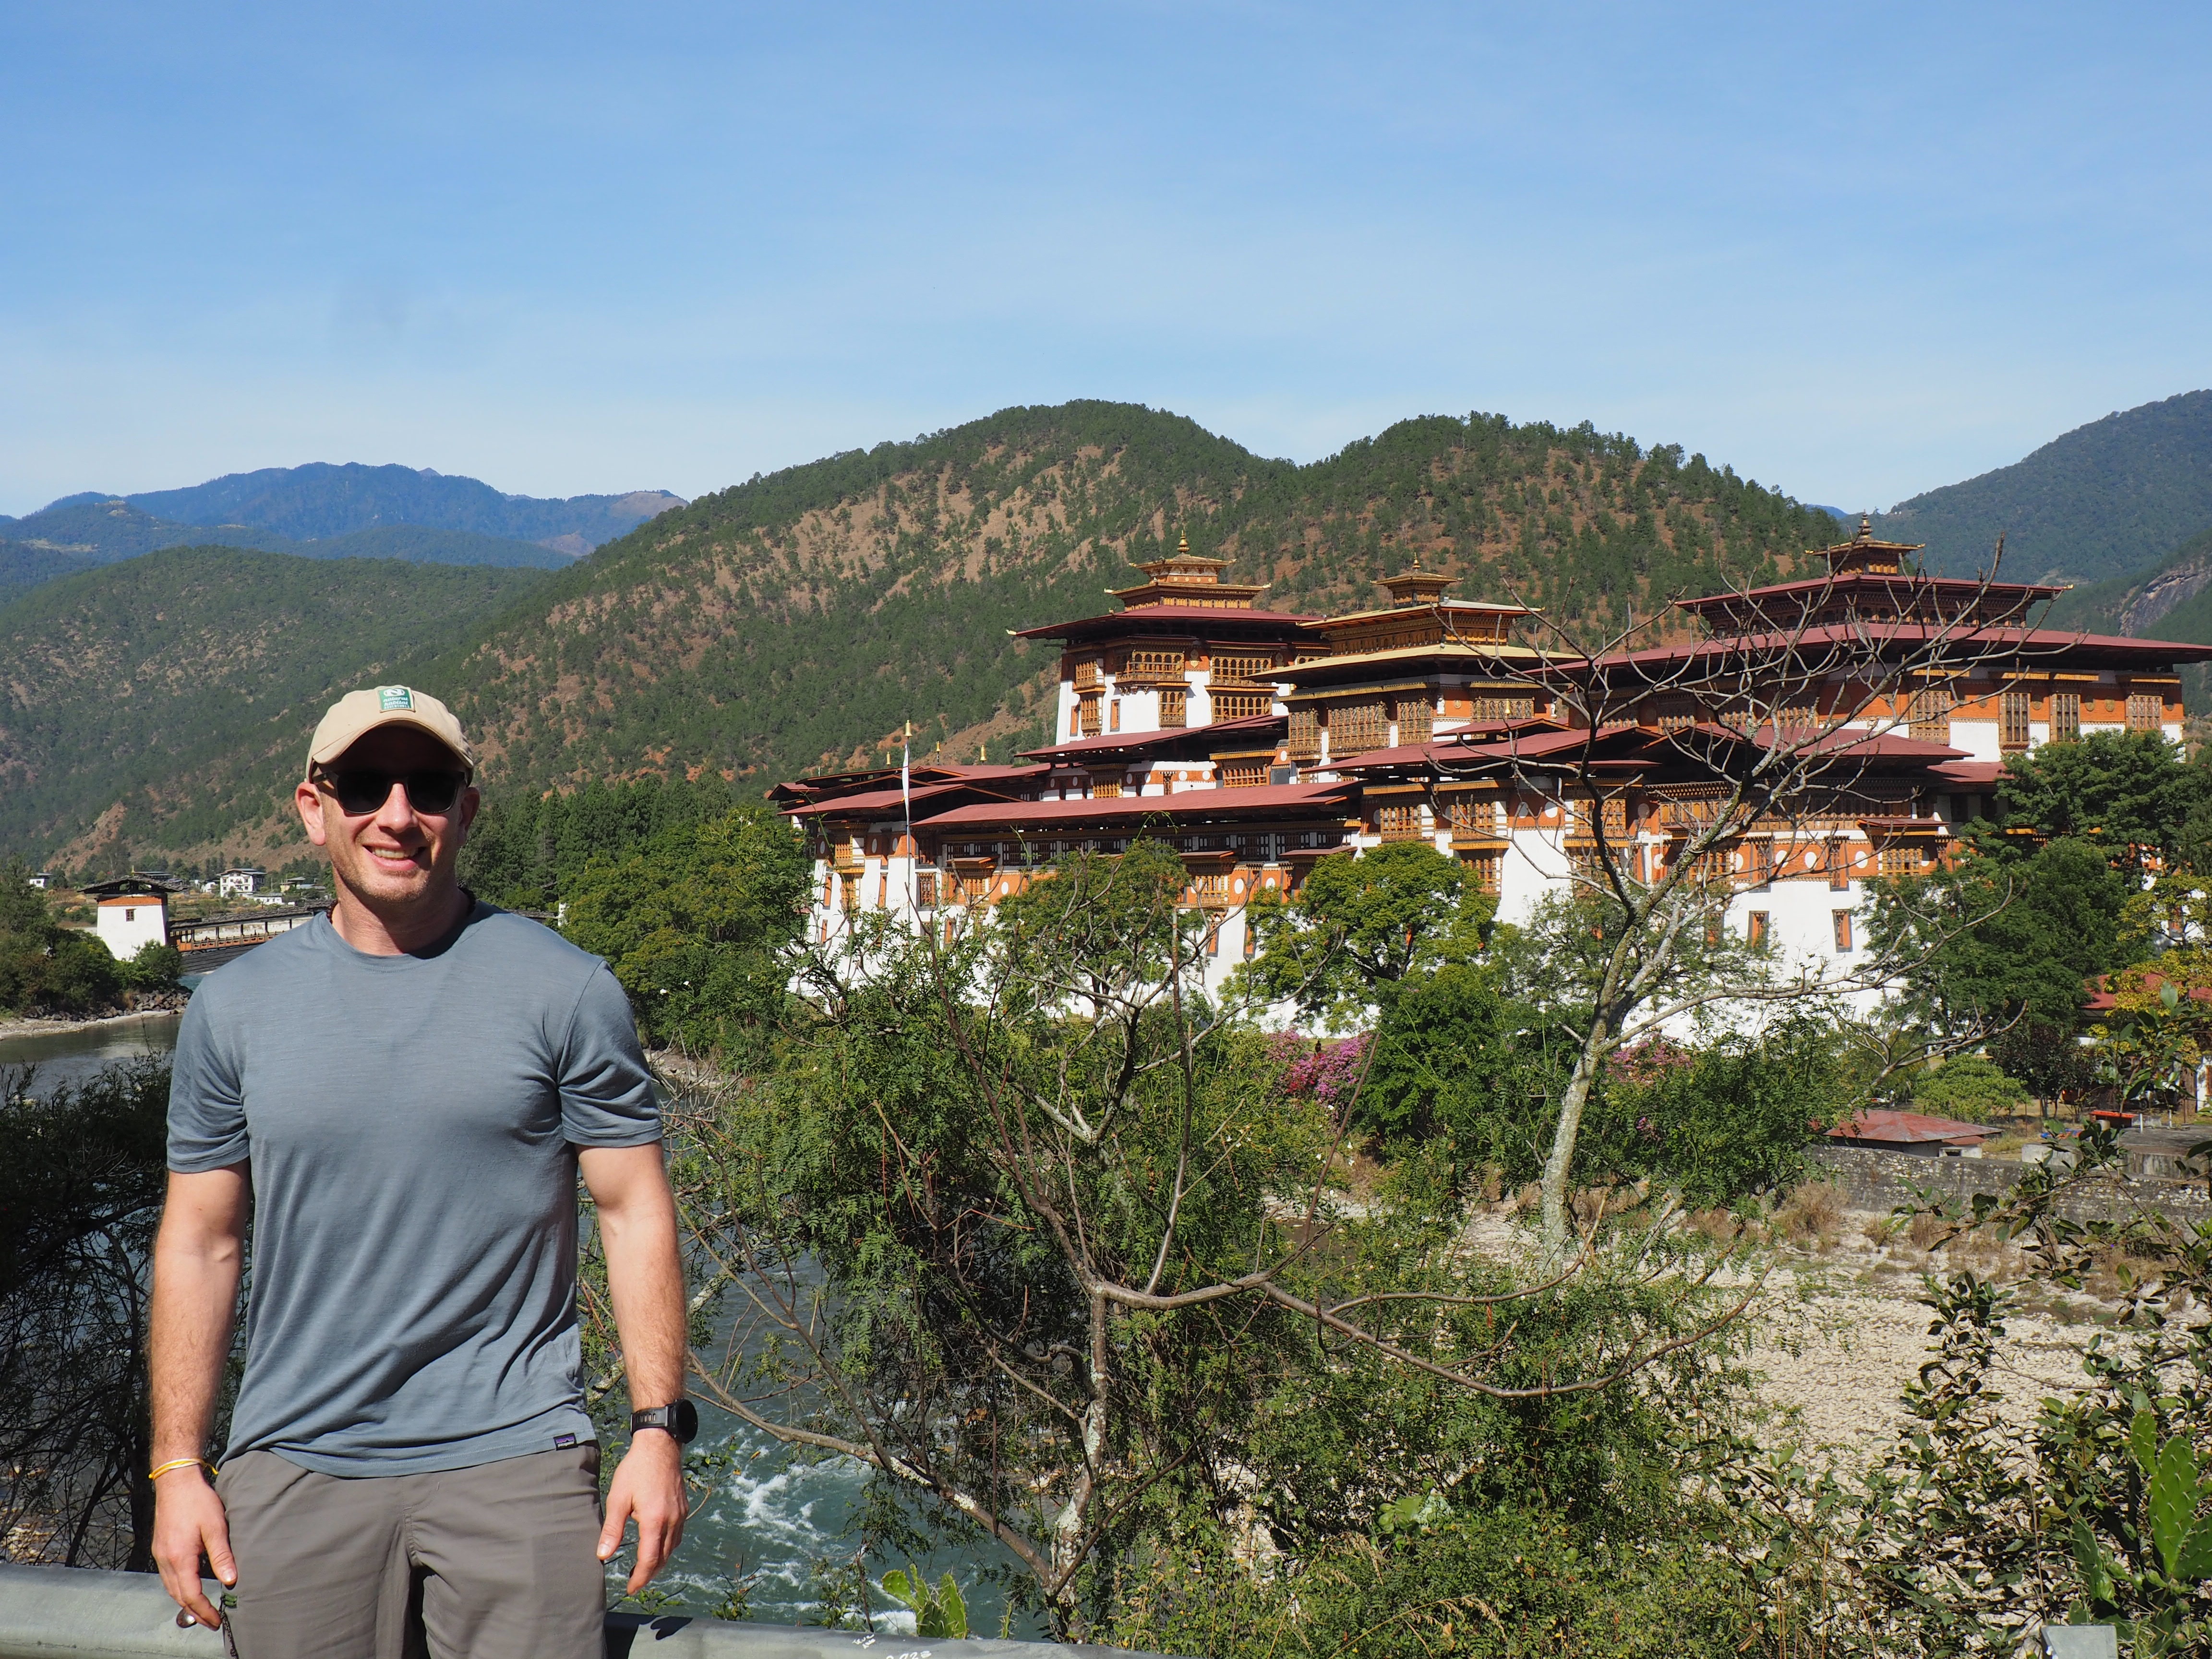 Every view in Bhutan is the perfect postcard.